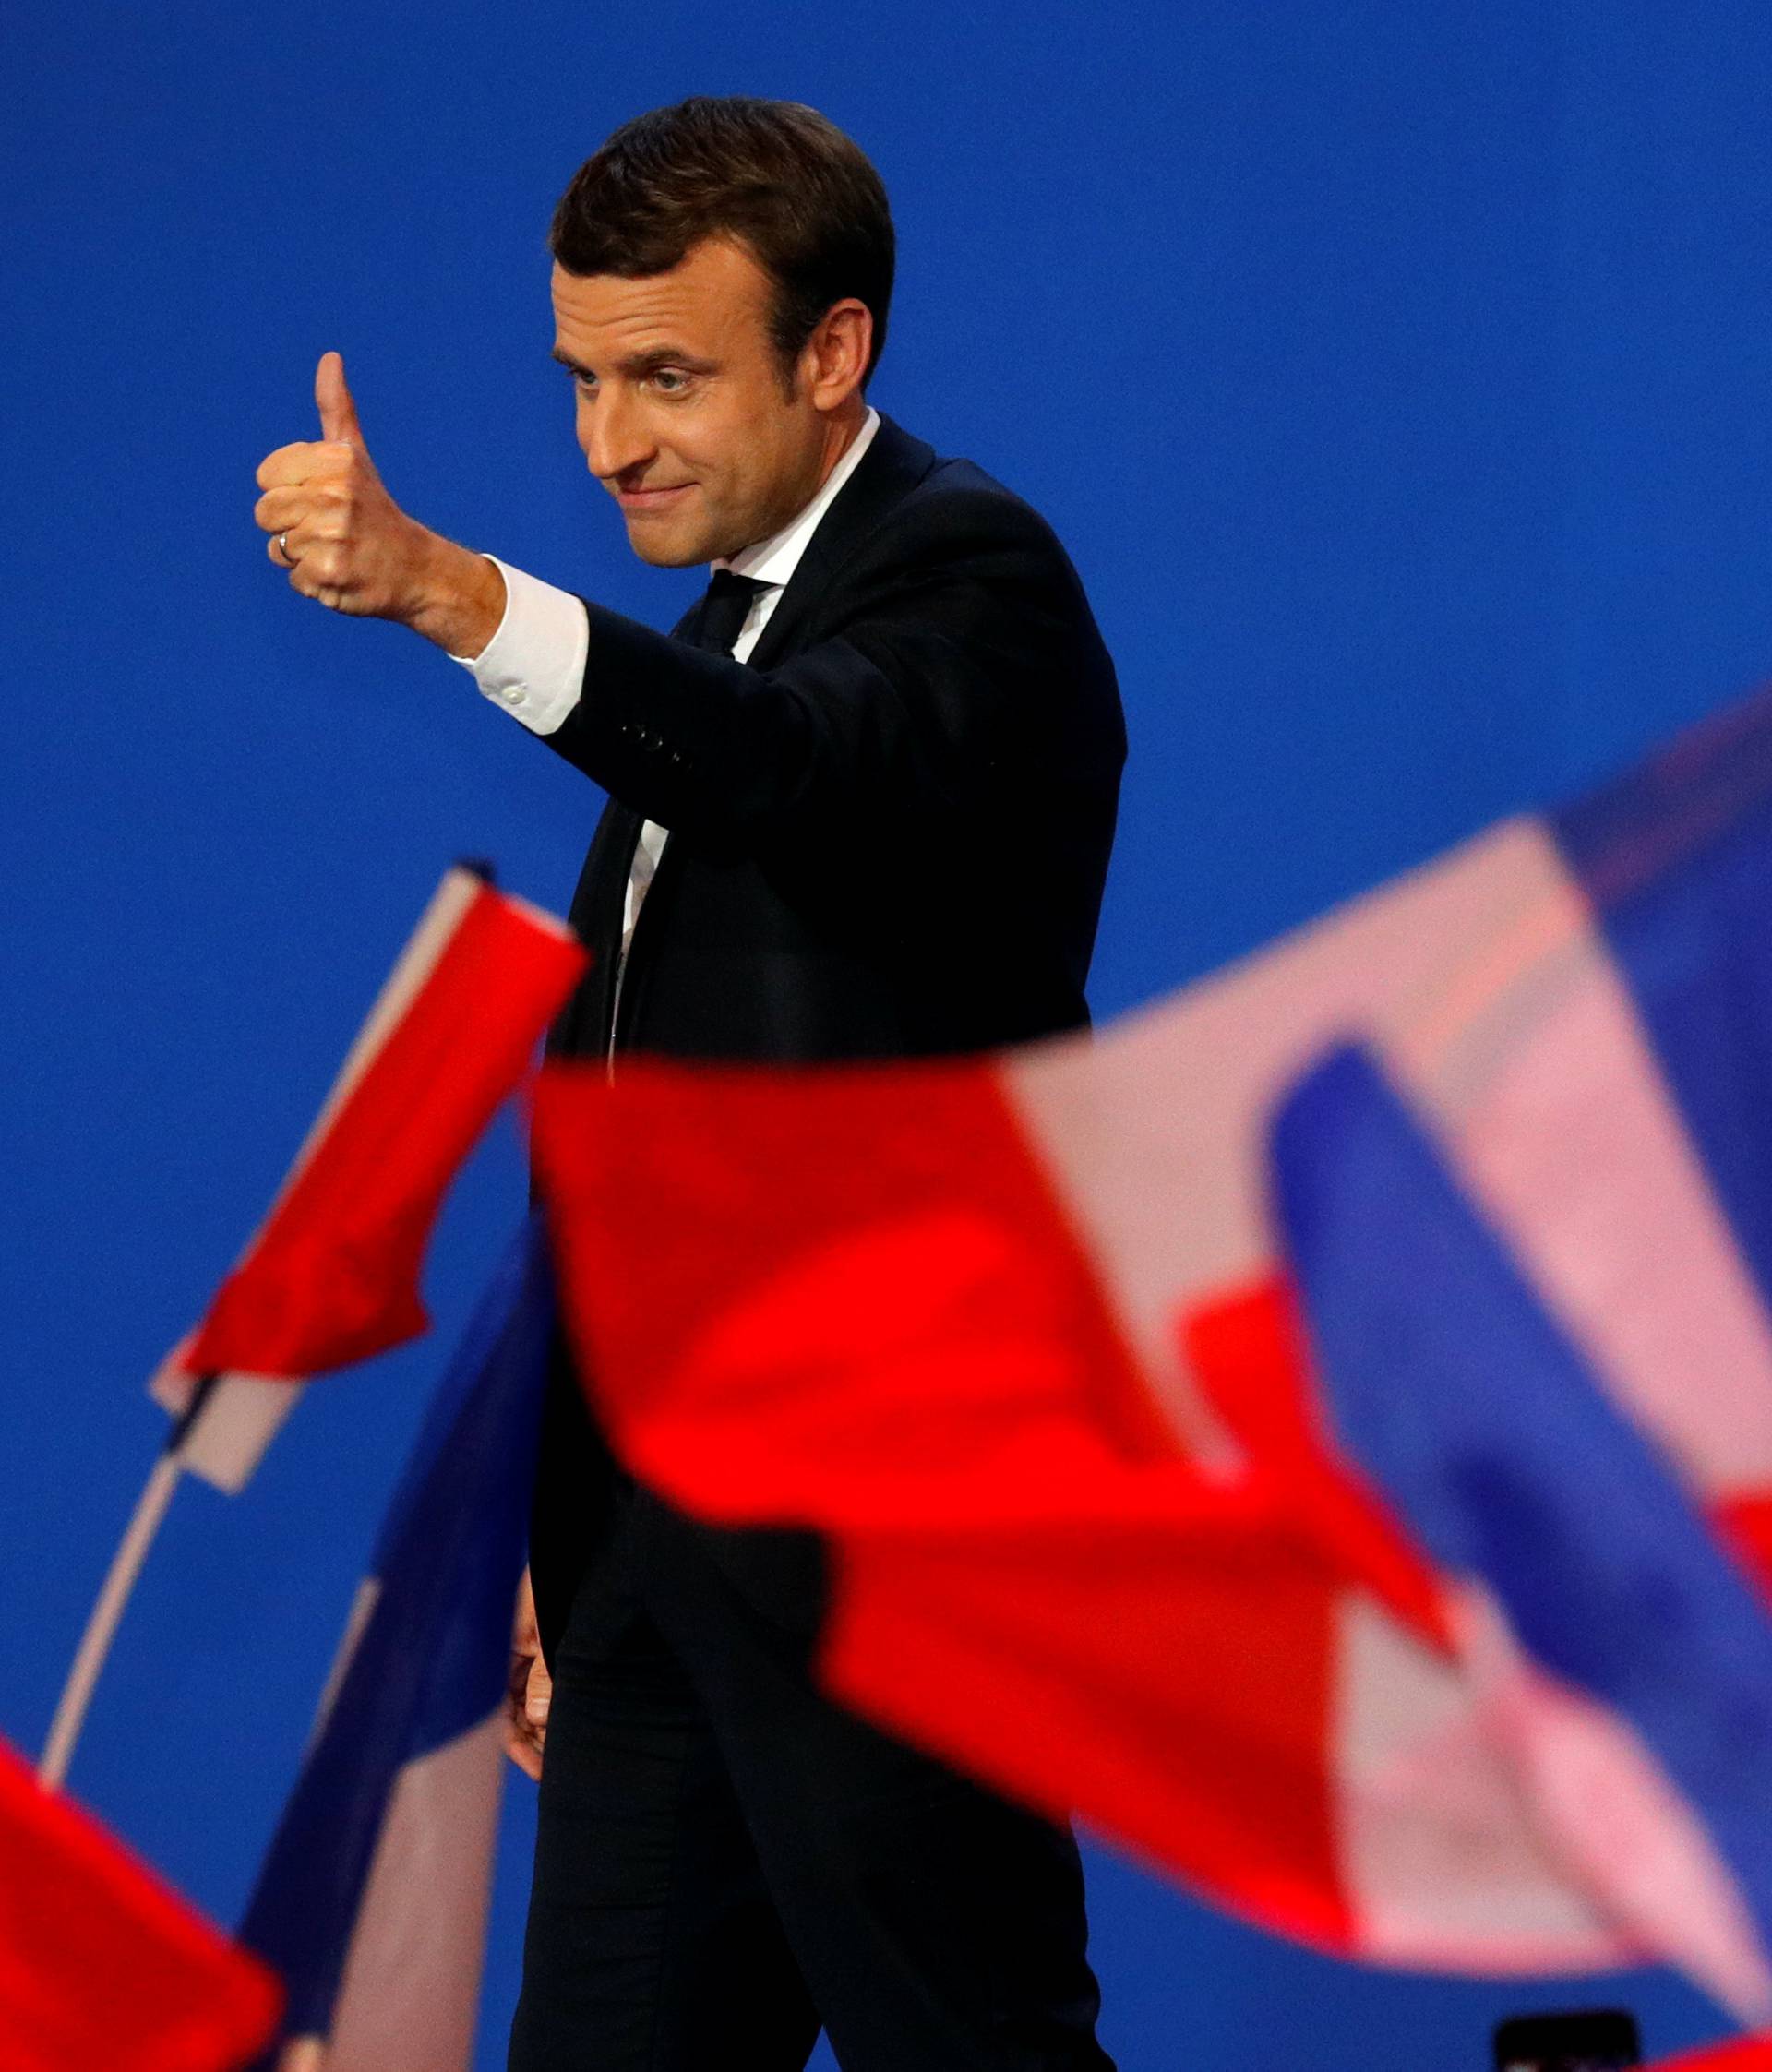 Emmanuel Macron, head of the political movement En Marche !, or Onwards !, and candidate for the 2017 French presidential election, gestures to supporters after the first round of 2017 French presidential election in Paris